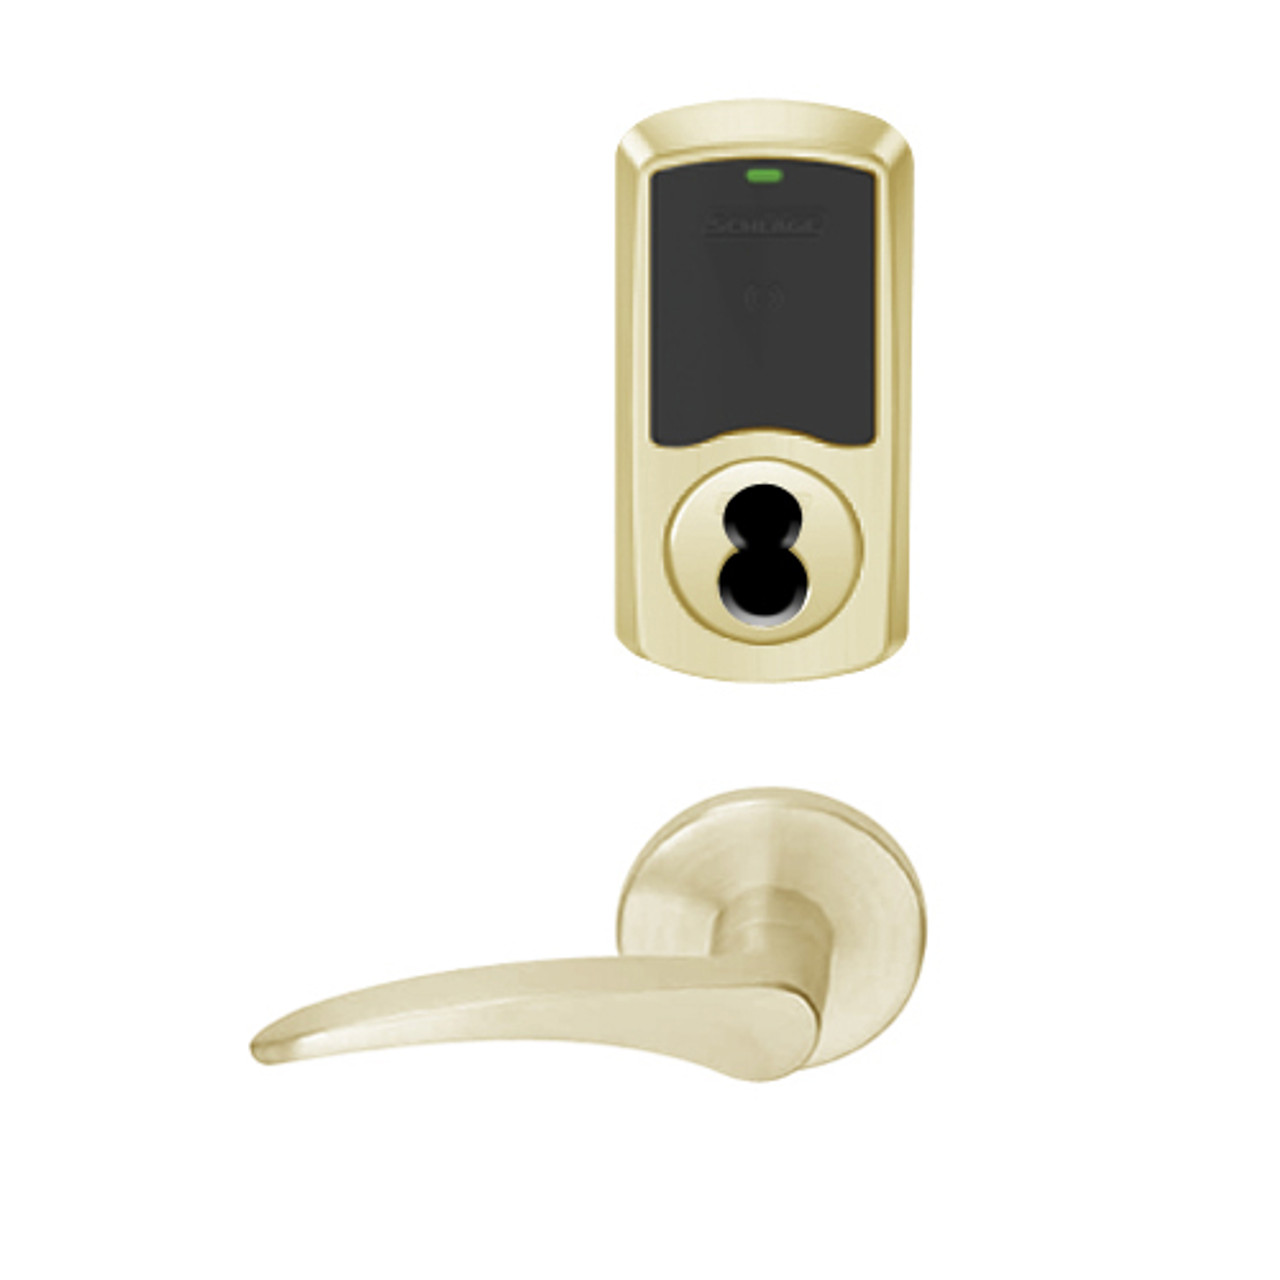 LEMD-GRW-J-12-606-00C-LH Schlage Privacy/Apartment Wireless Greenwich Mortise Deadbolt Lock with LED and 12 Lever Prepped for FSIC in Satin Brass